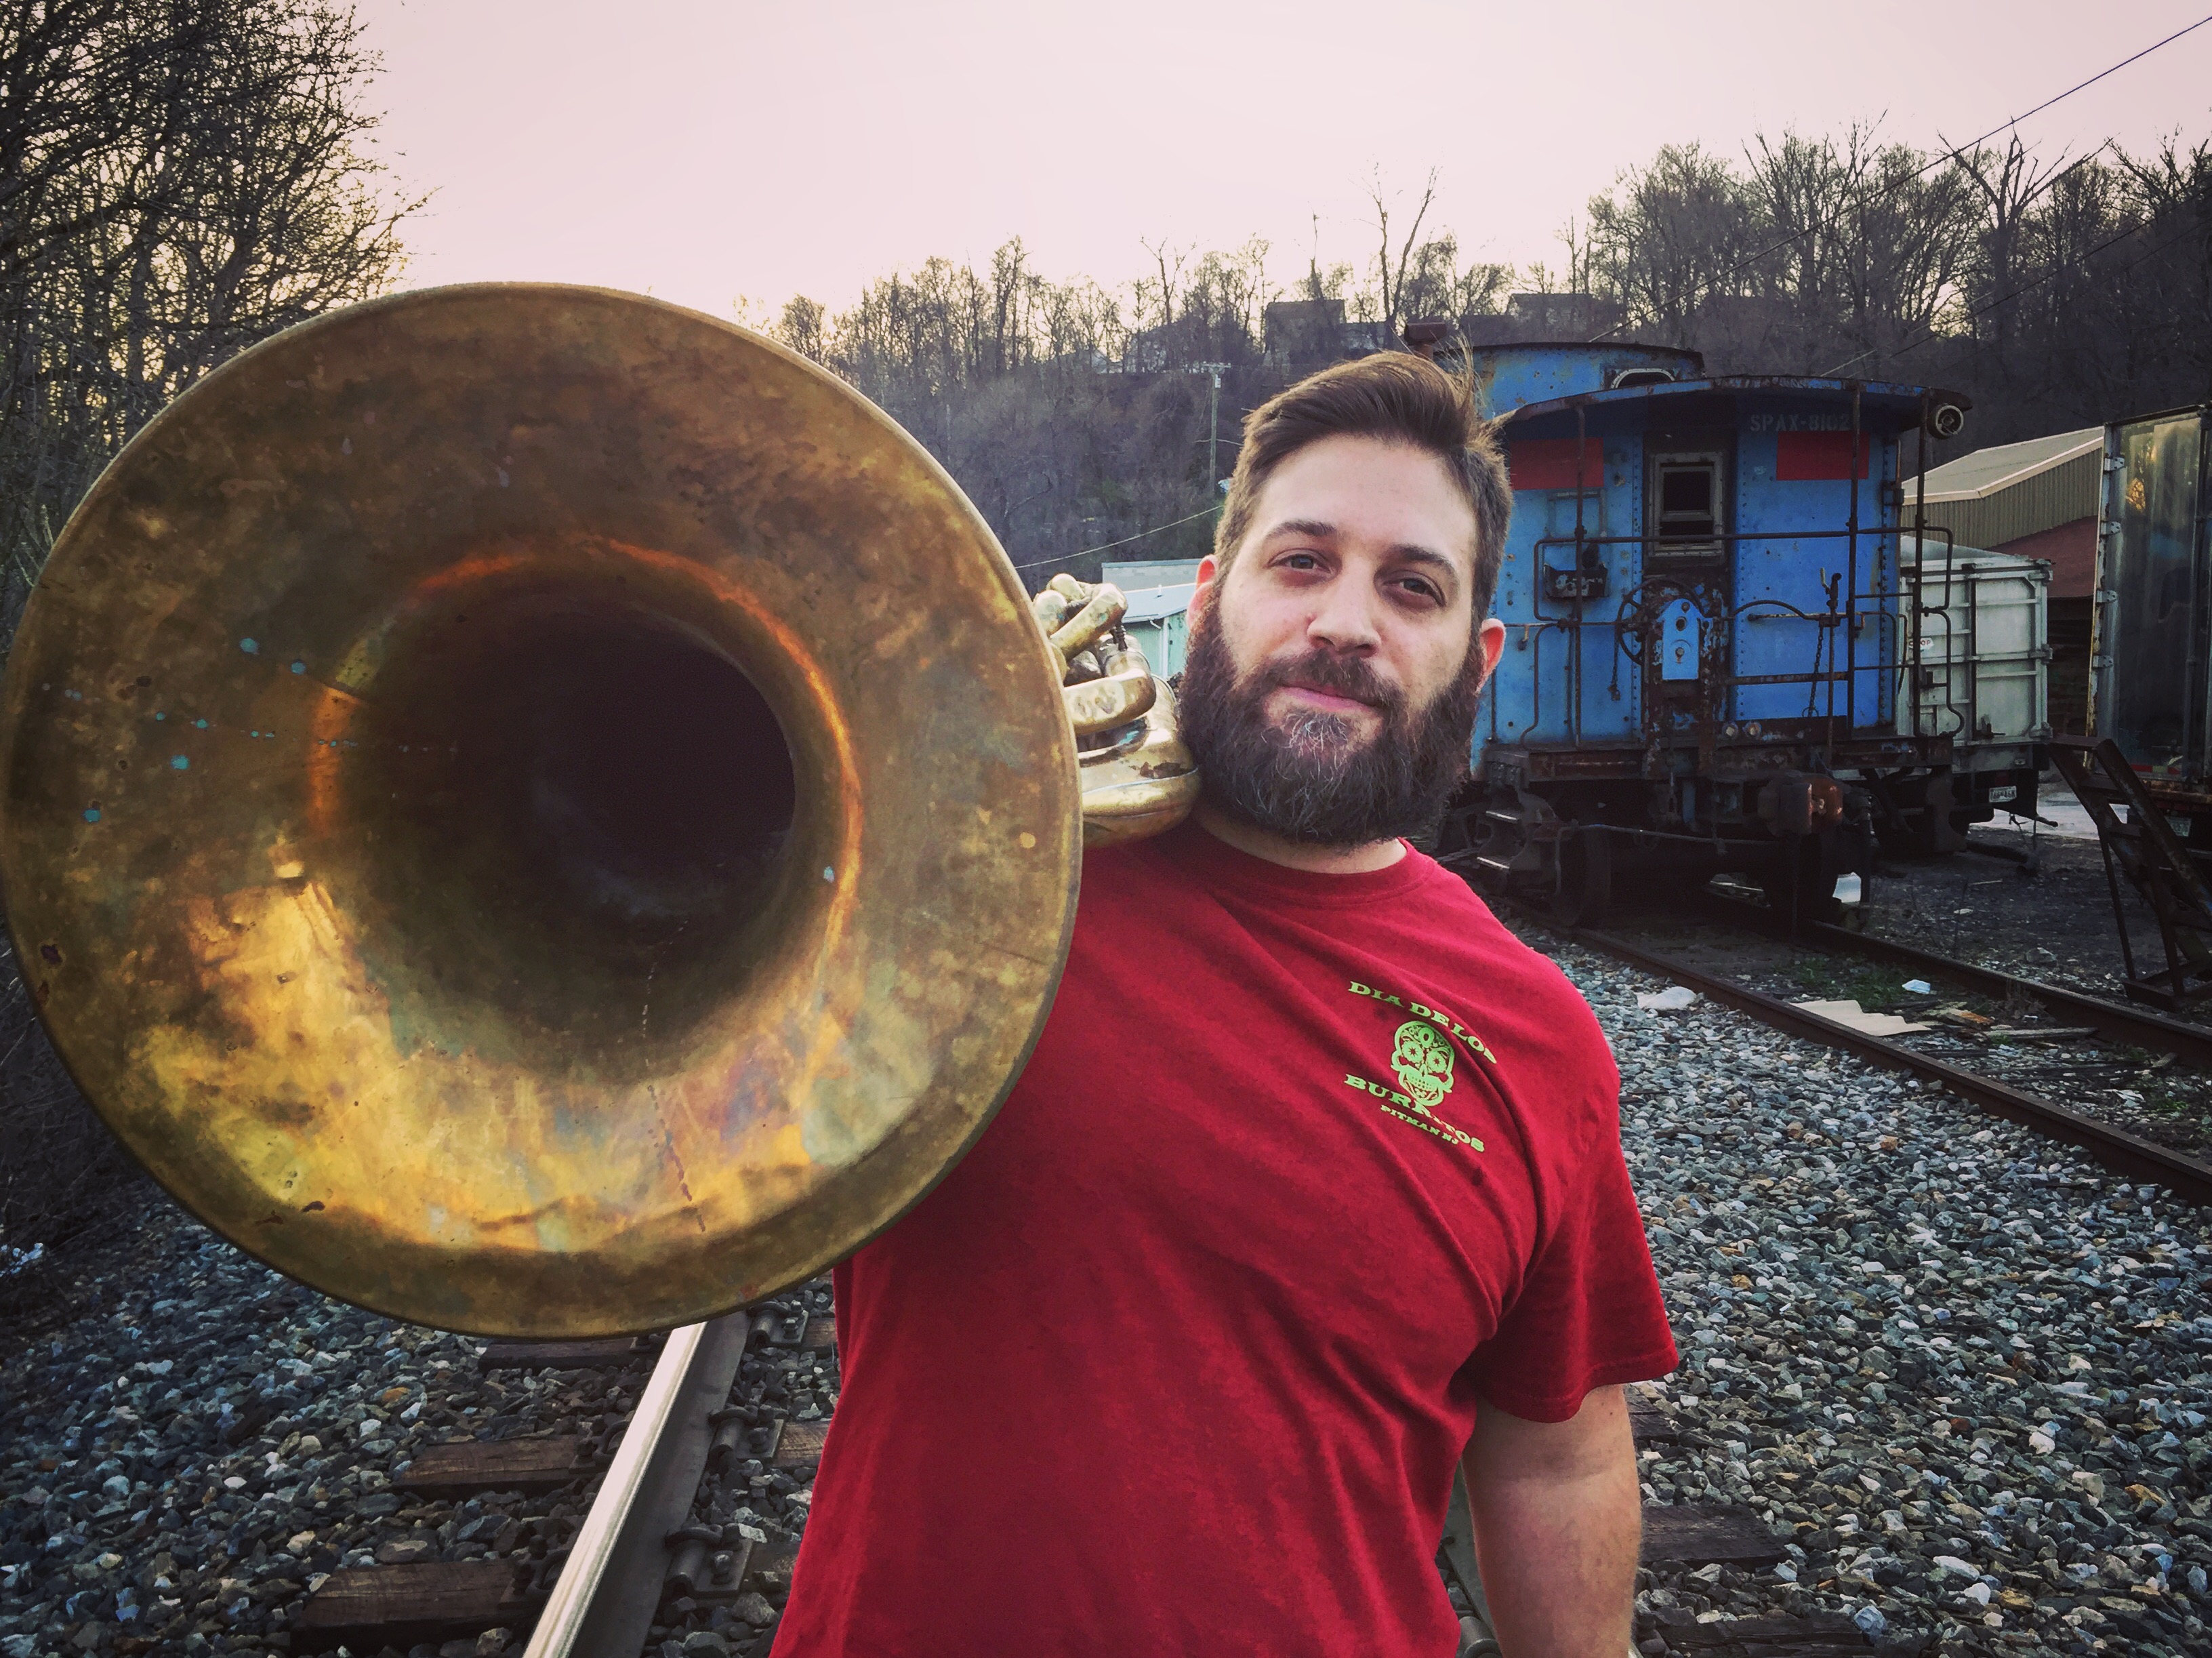 Jason Ager entertainer holding a tuba at a train yard